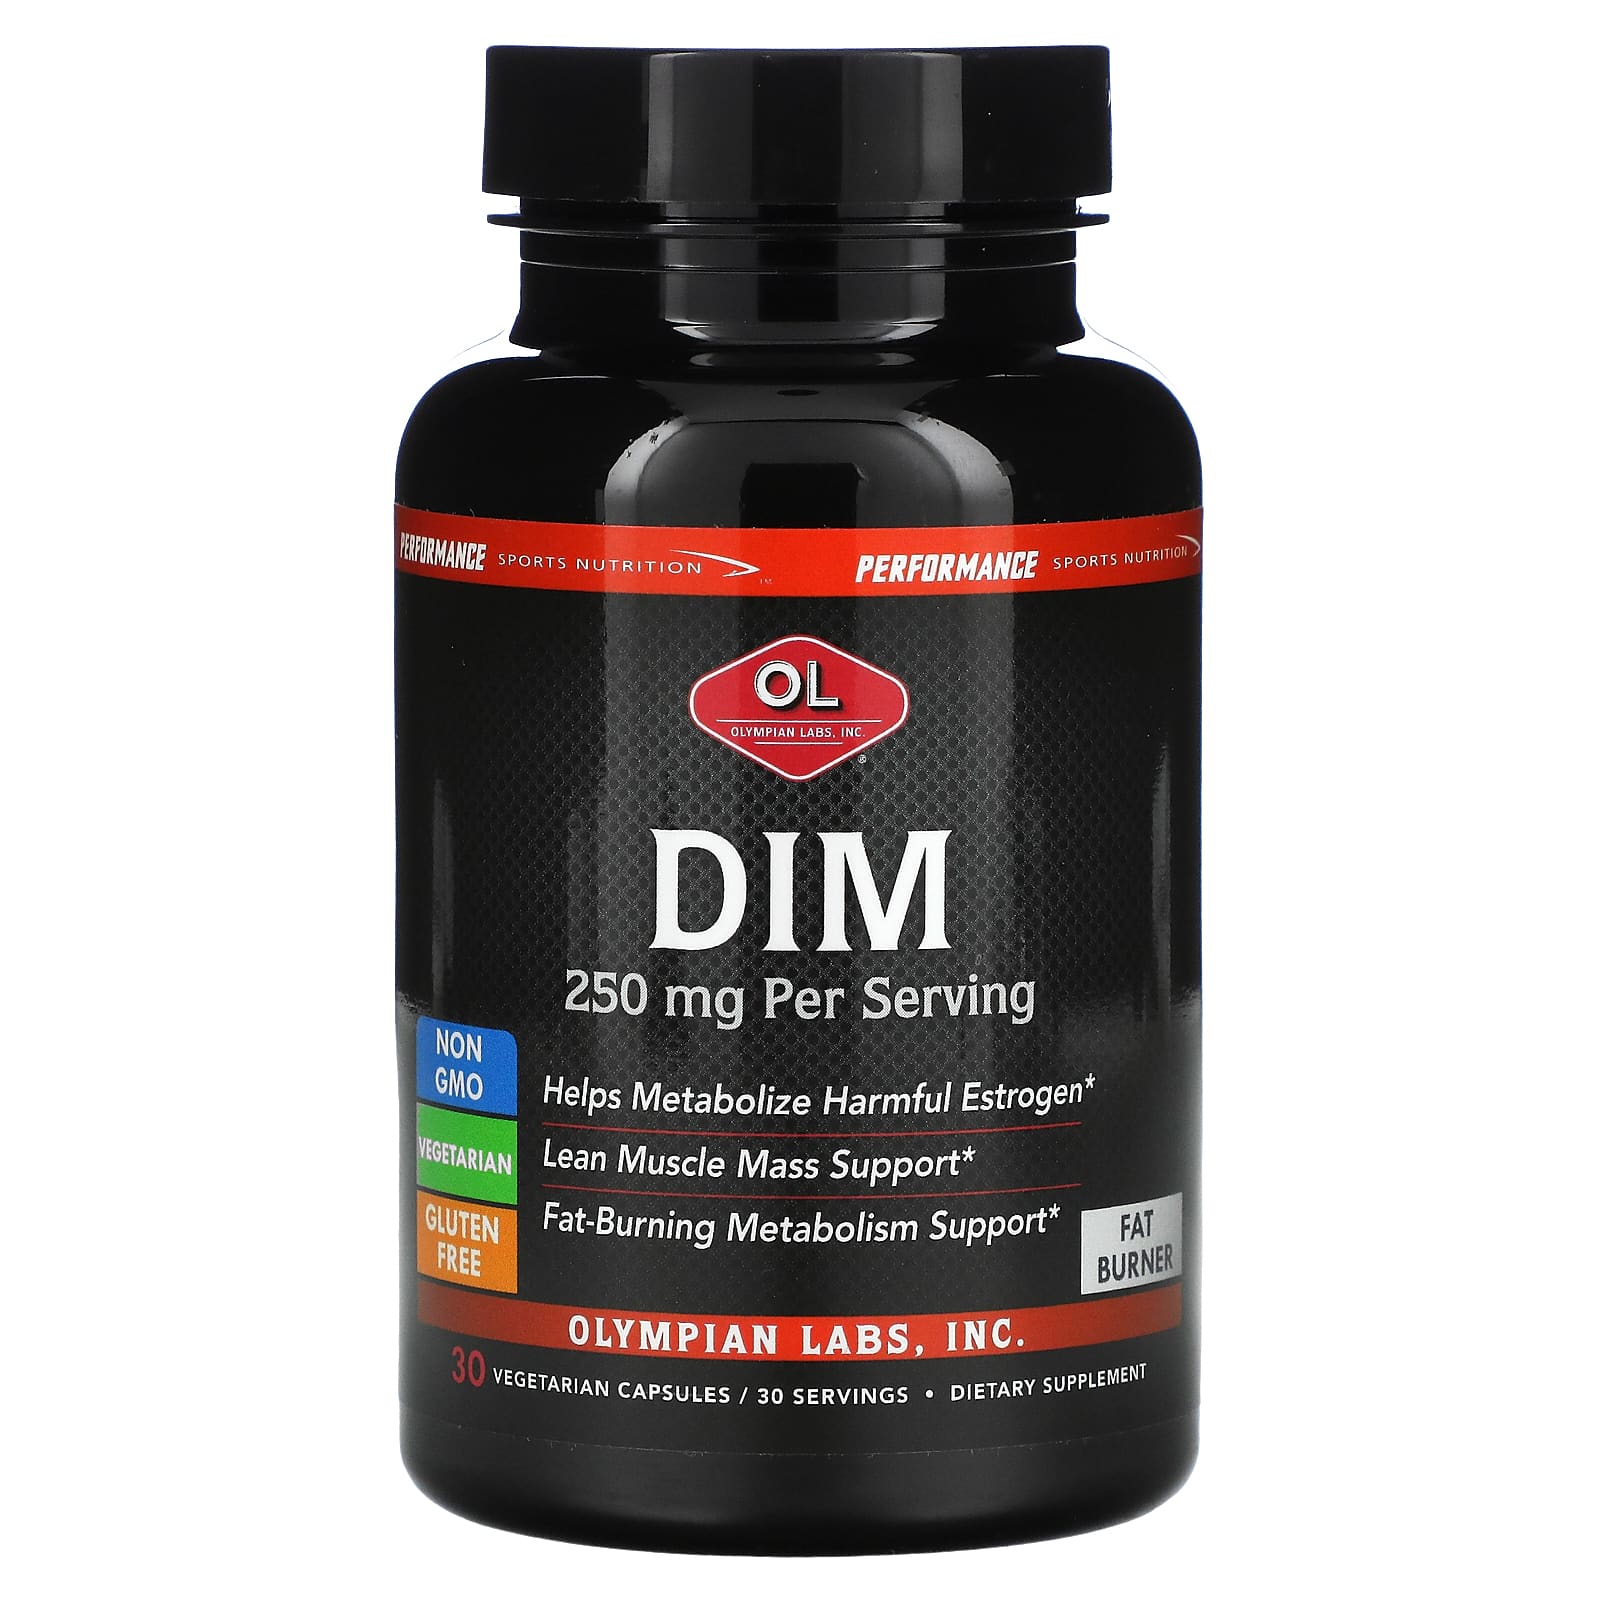 Olympian Labs Performance Sports Nutrition DIM 250 mg 30 Vegetarian Capsules olympian labs performance sports nutrition dim 250 мг 30 вегетарианских капсул